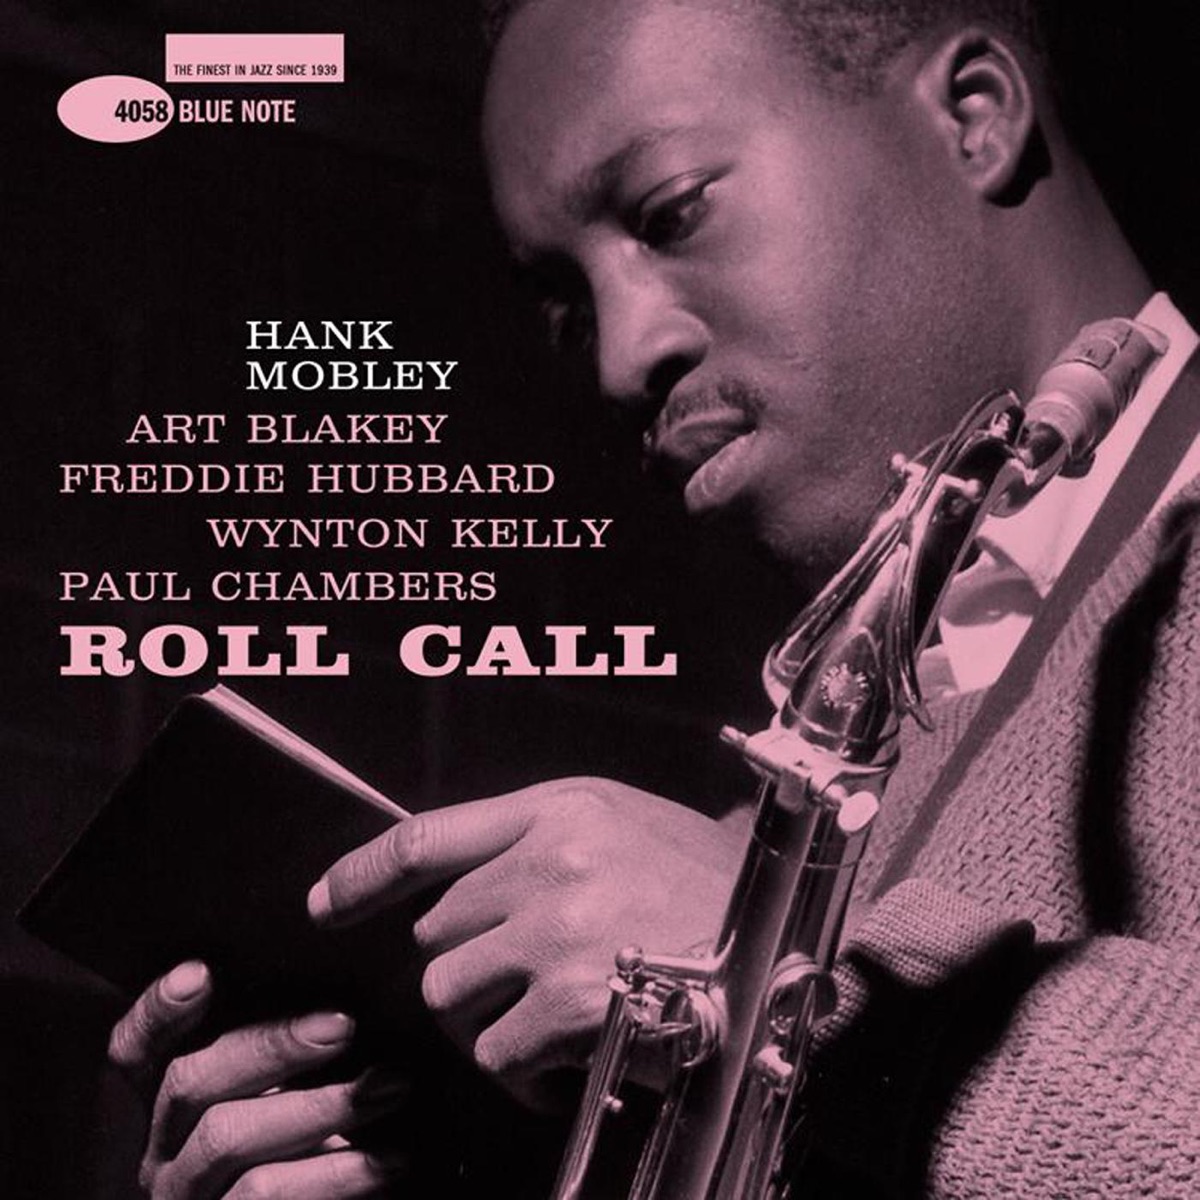 Poppin' - Album by Hank Mobley - Apple Music